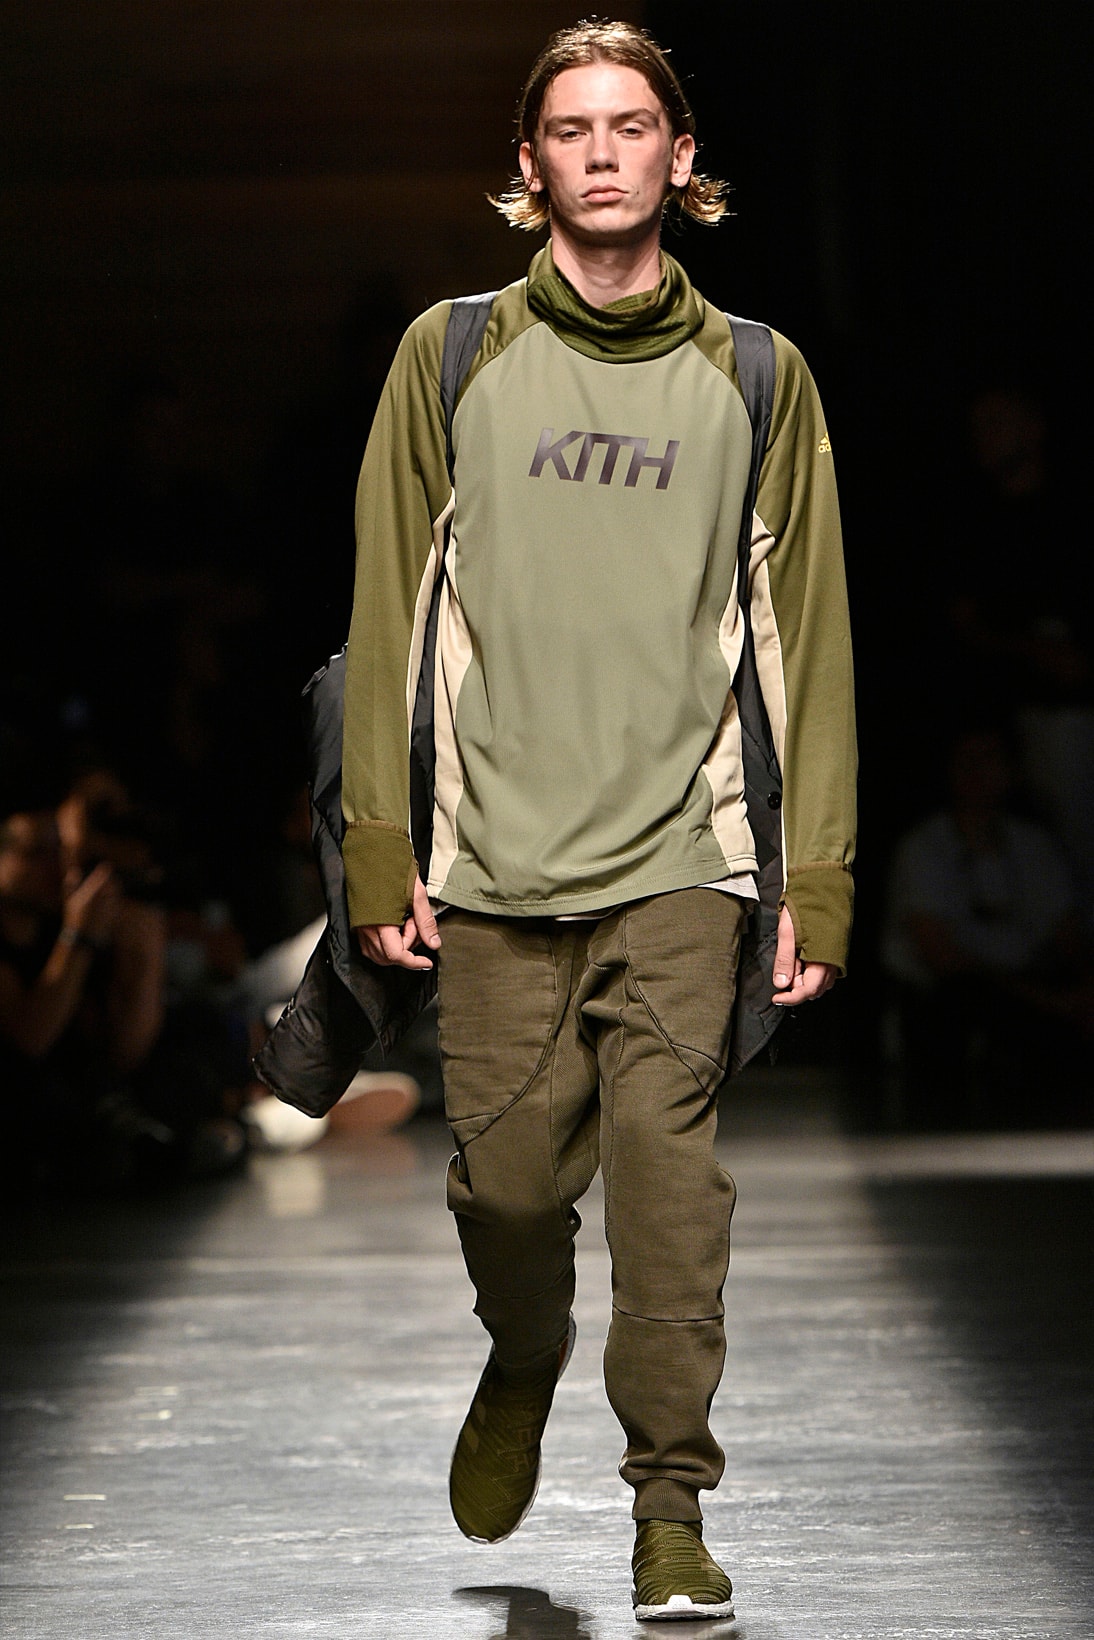 KITH SPORT 2018 Spring/Summer Collection